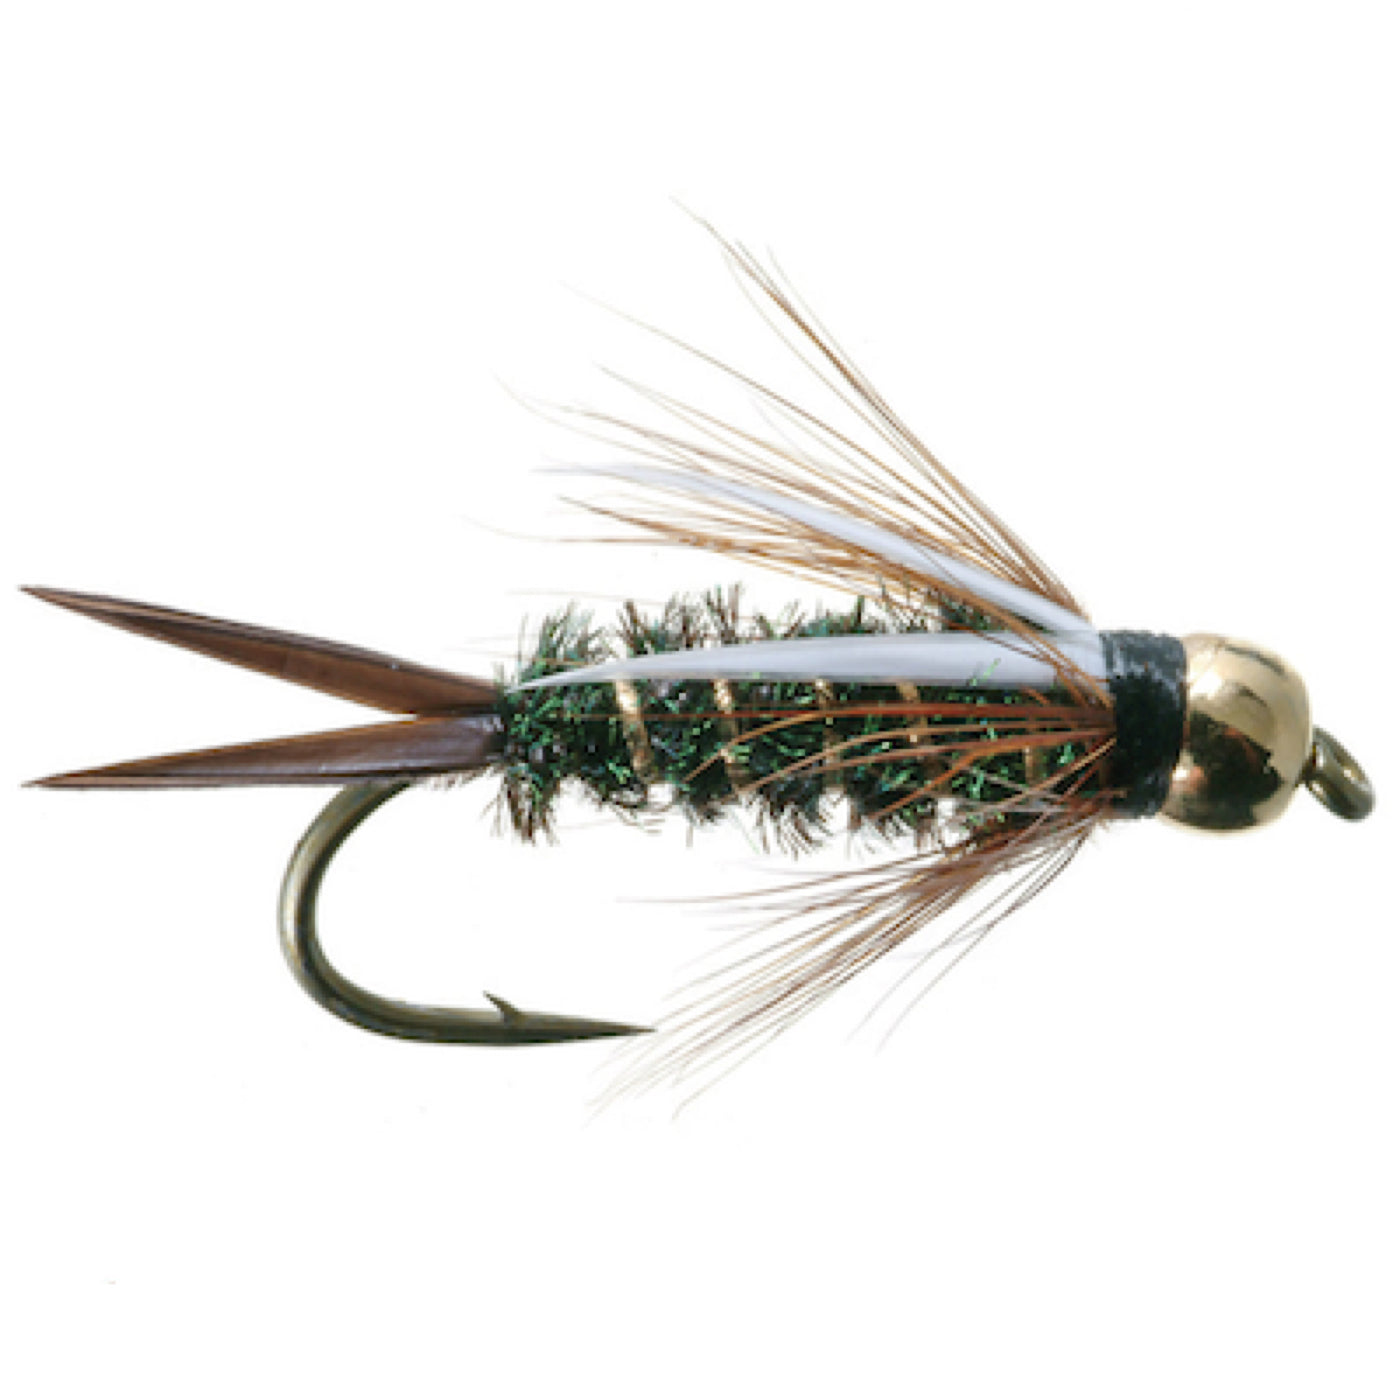 Nymph & Bead Head Fly Patterns for Sale